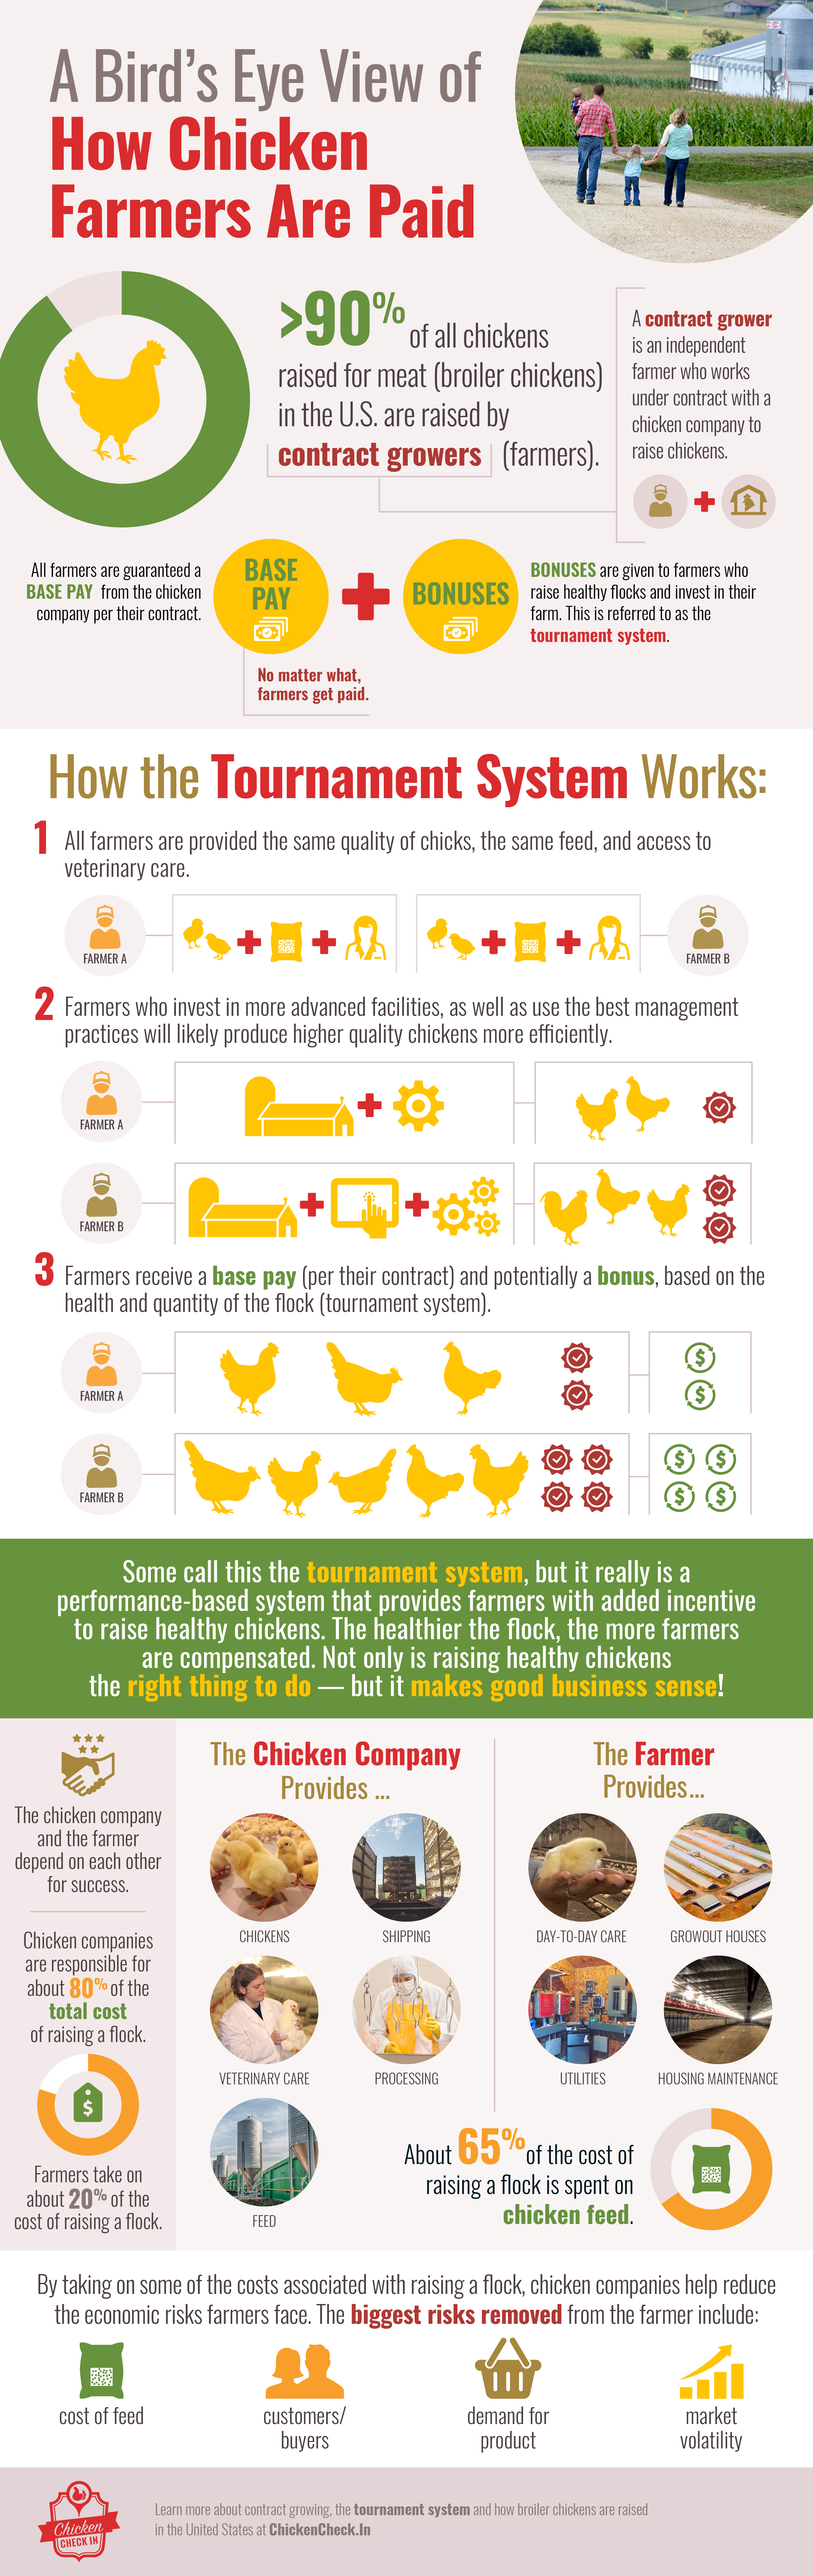 How-Chicken-Farmers-Paid_Tournament-System-Infographic_150dpi